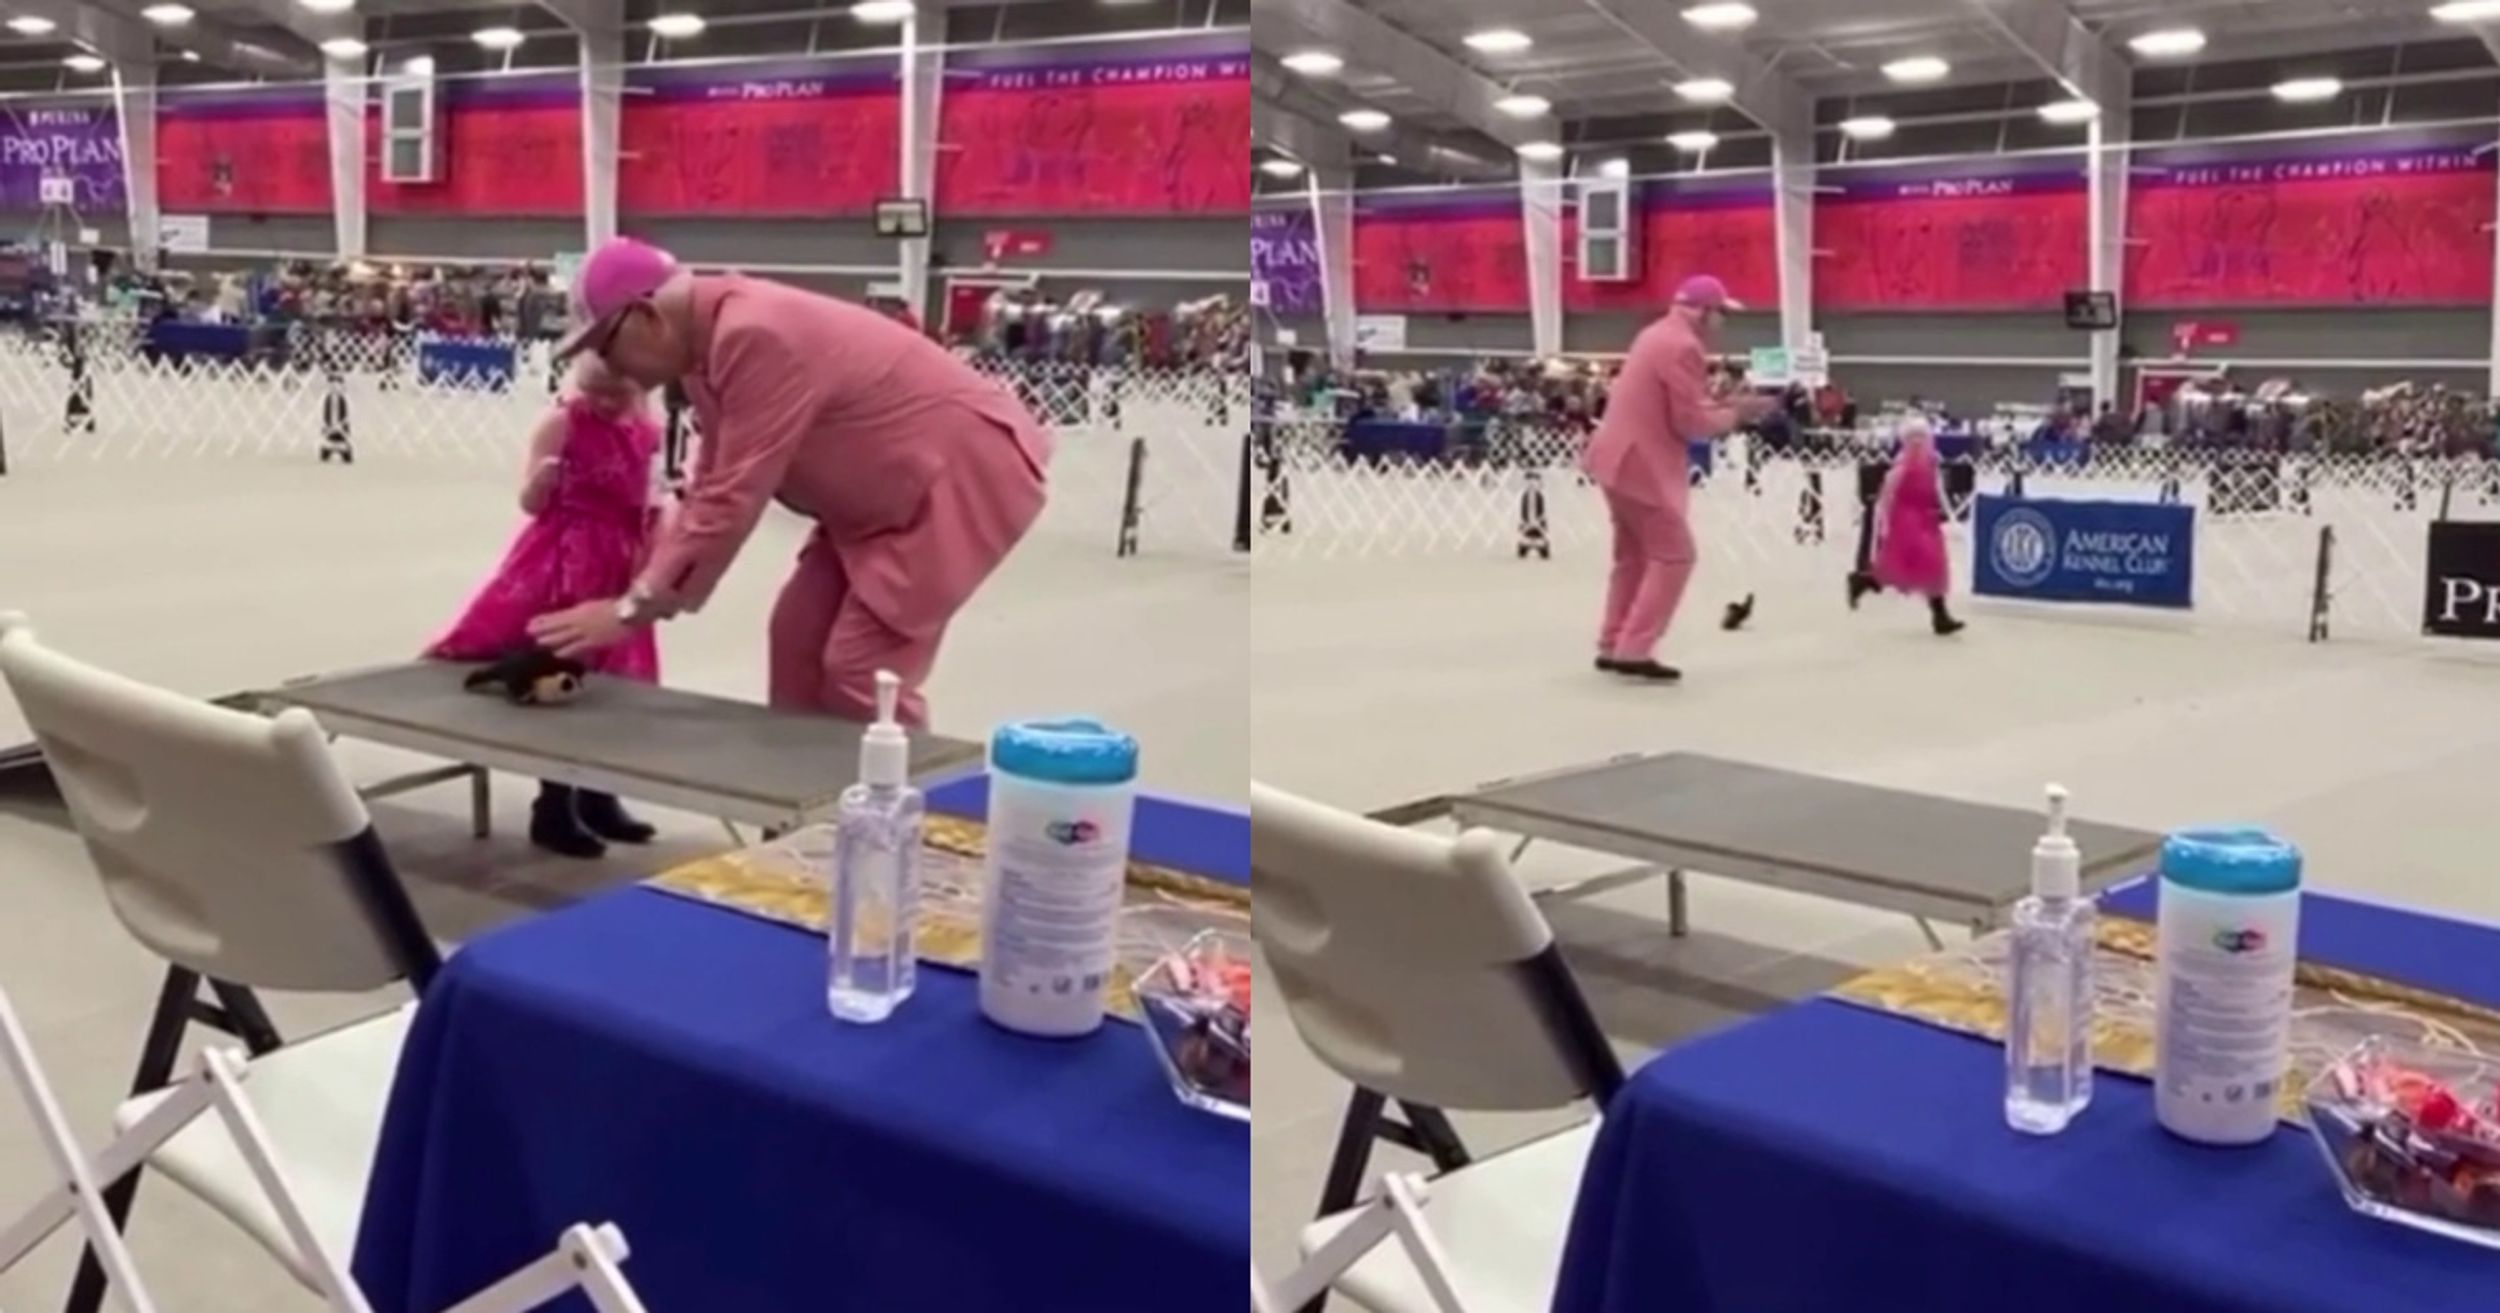 Dog Show Judge Makes Little Girl With Autism's Day By Letting Her Show Her Stuffed Animal Dog